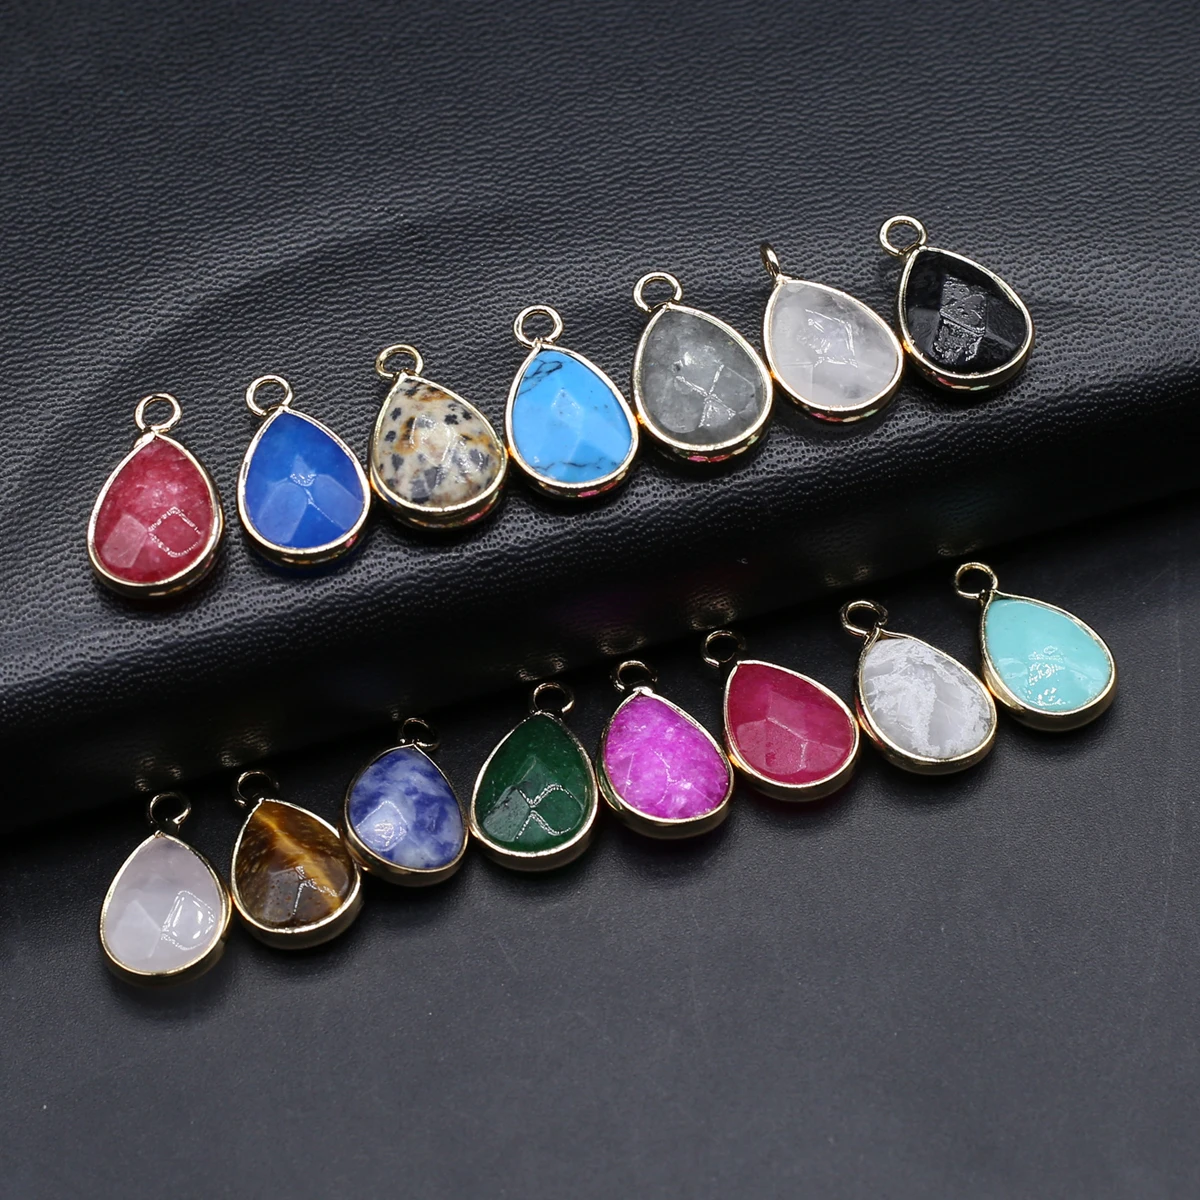 

15PCS Natural Semiprecious Stone Random Color Water Droplet Pendant 19x11mm Jewelry Making DIY Necklace Earrings Accessories